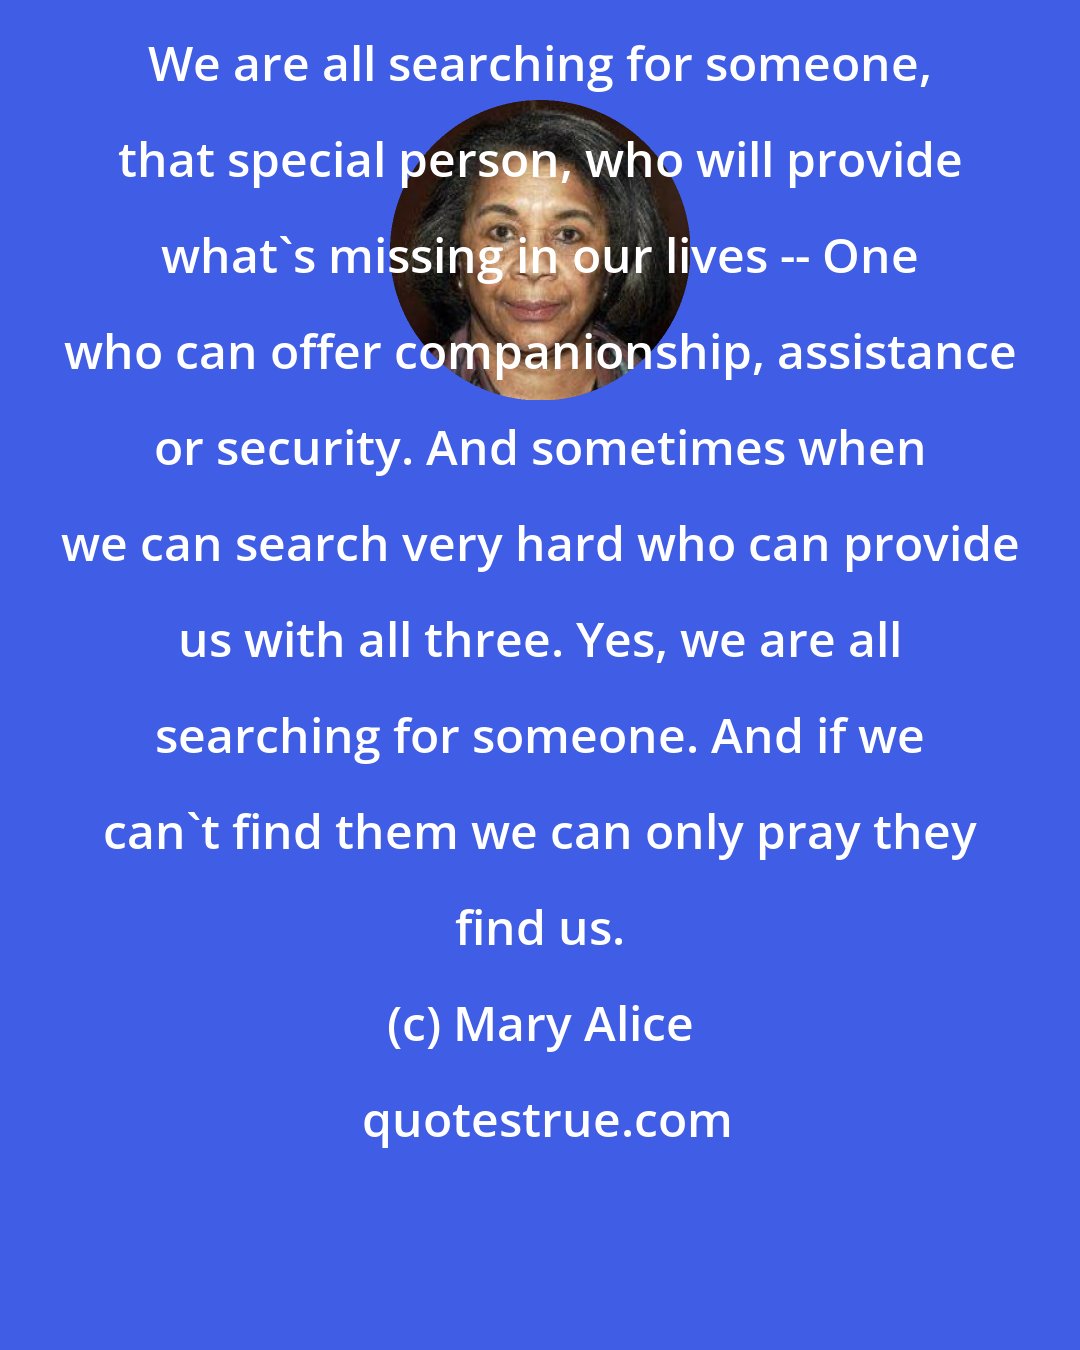 Mary Alice: We are all searching for someone, that special person, who will provide what's missing in our lives -- One who can offer companionship, assistance or security. And sometimes when we can search very hard who can provide us with all three. Yes, we are all searching for someone. And if we can't find them we can only pray they find us.